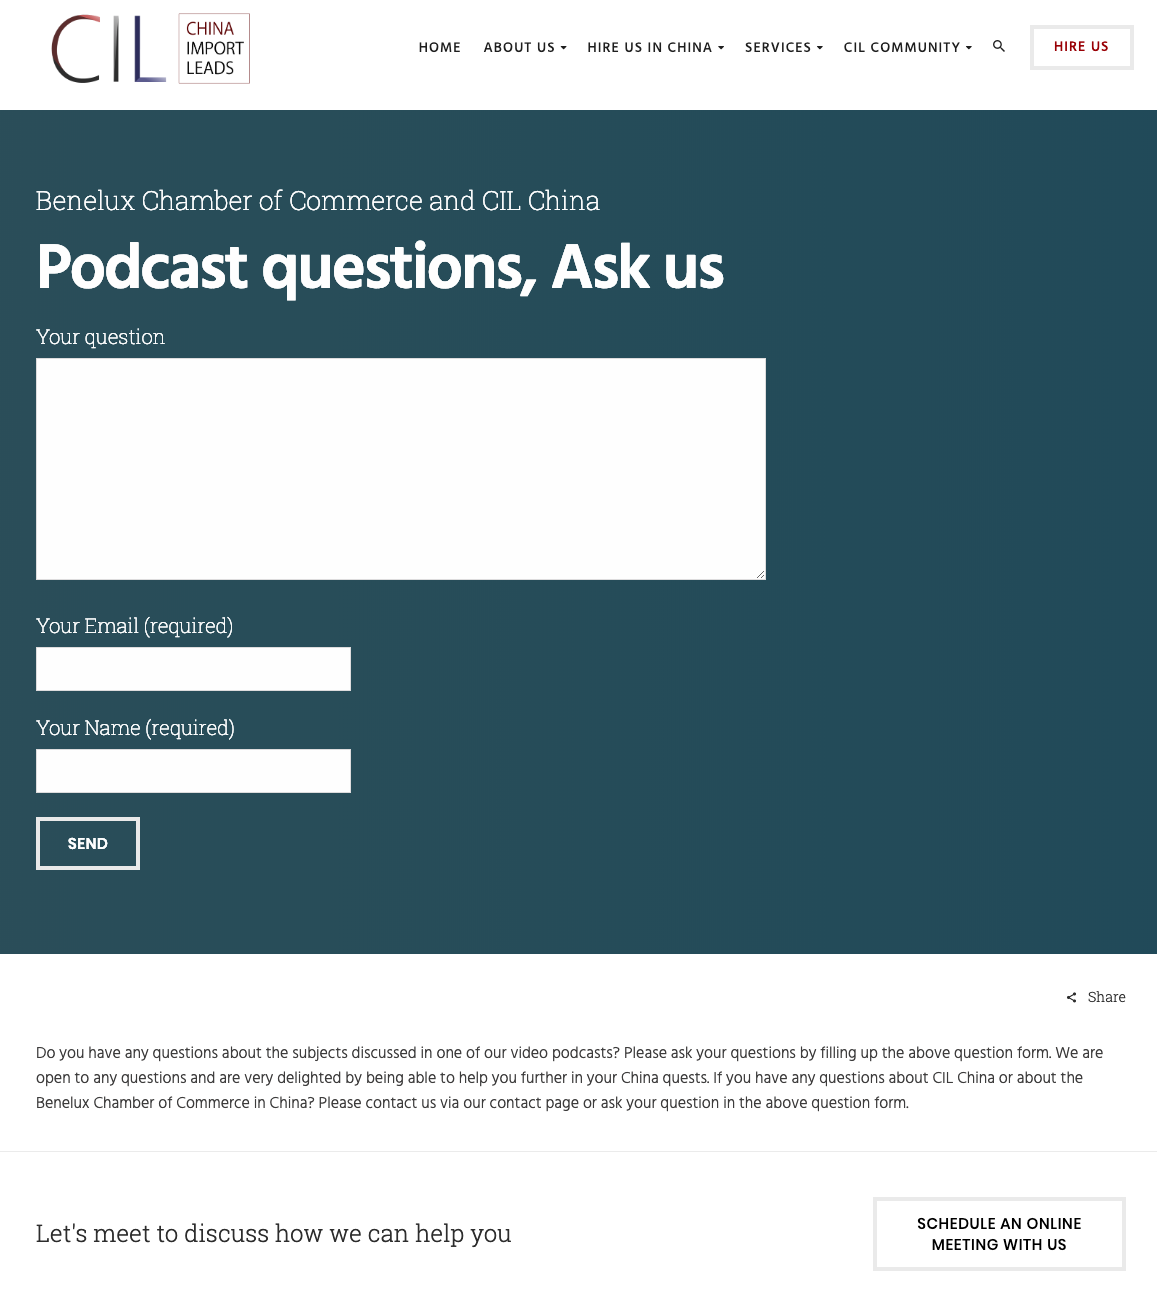 China video podcasts ask questions